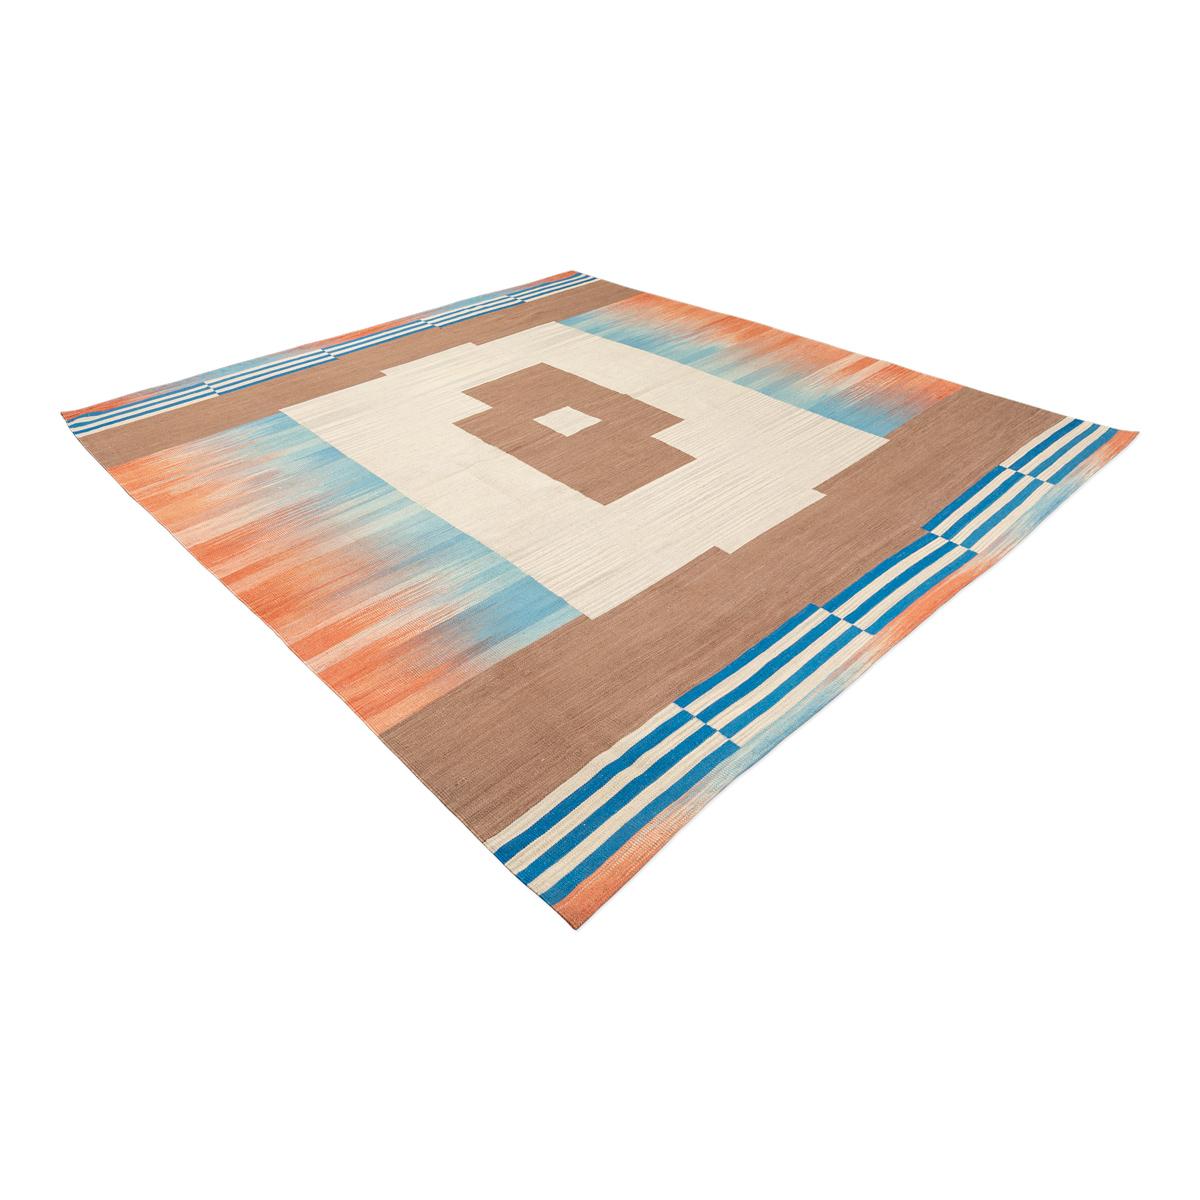 Contemporary Kilim made by hand in wool 100% in earth, blue and orange colors.
- Aged and nuanced colors that will bring warmth.
- The combination is perfect resulting in a unique and exclusive handmade rug.
- It will be perfect in modern and